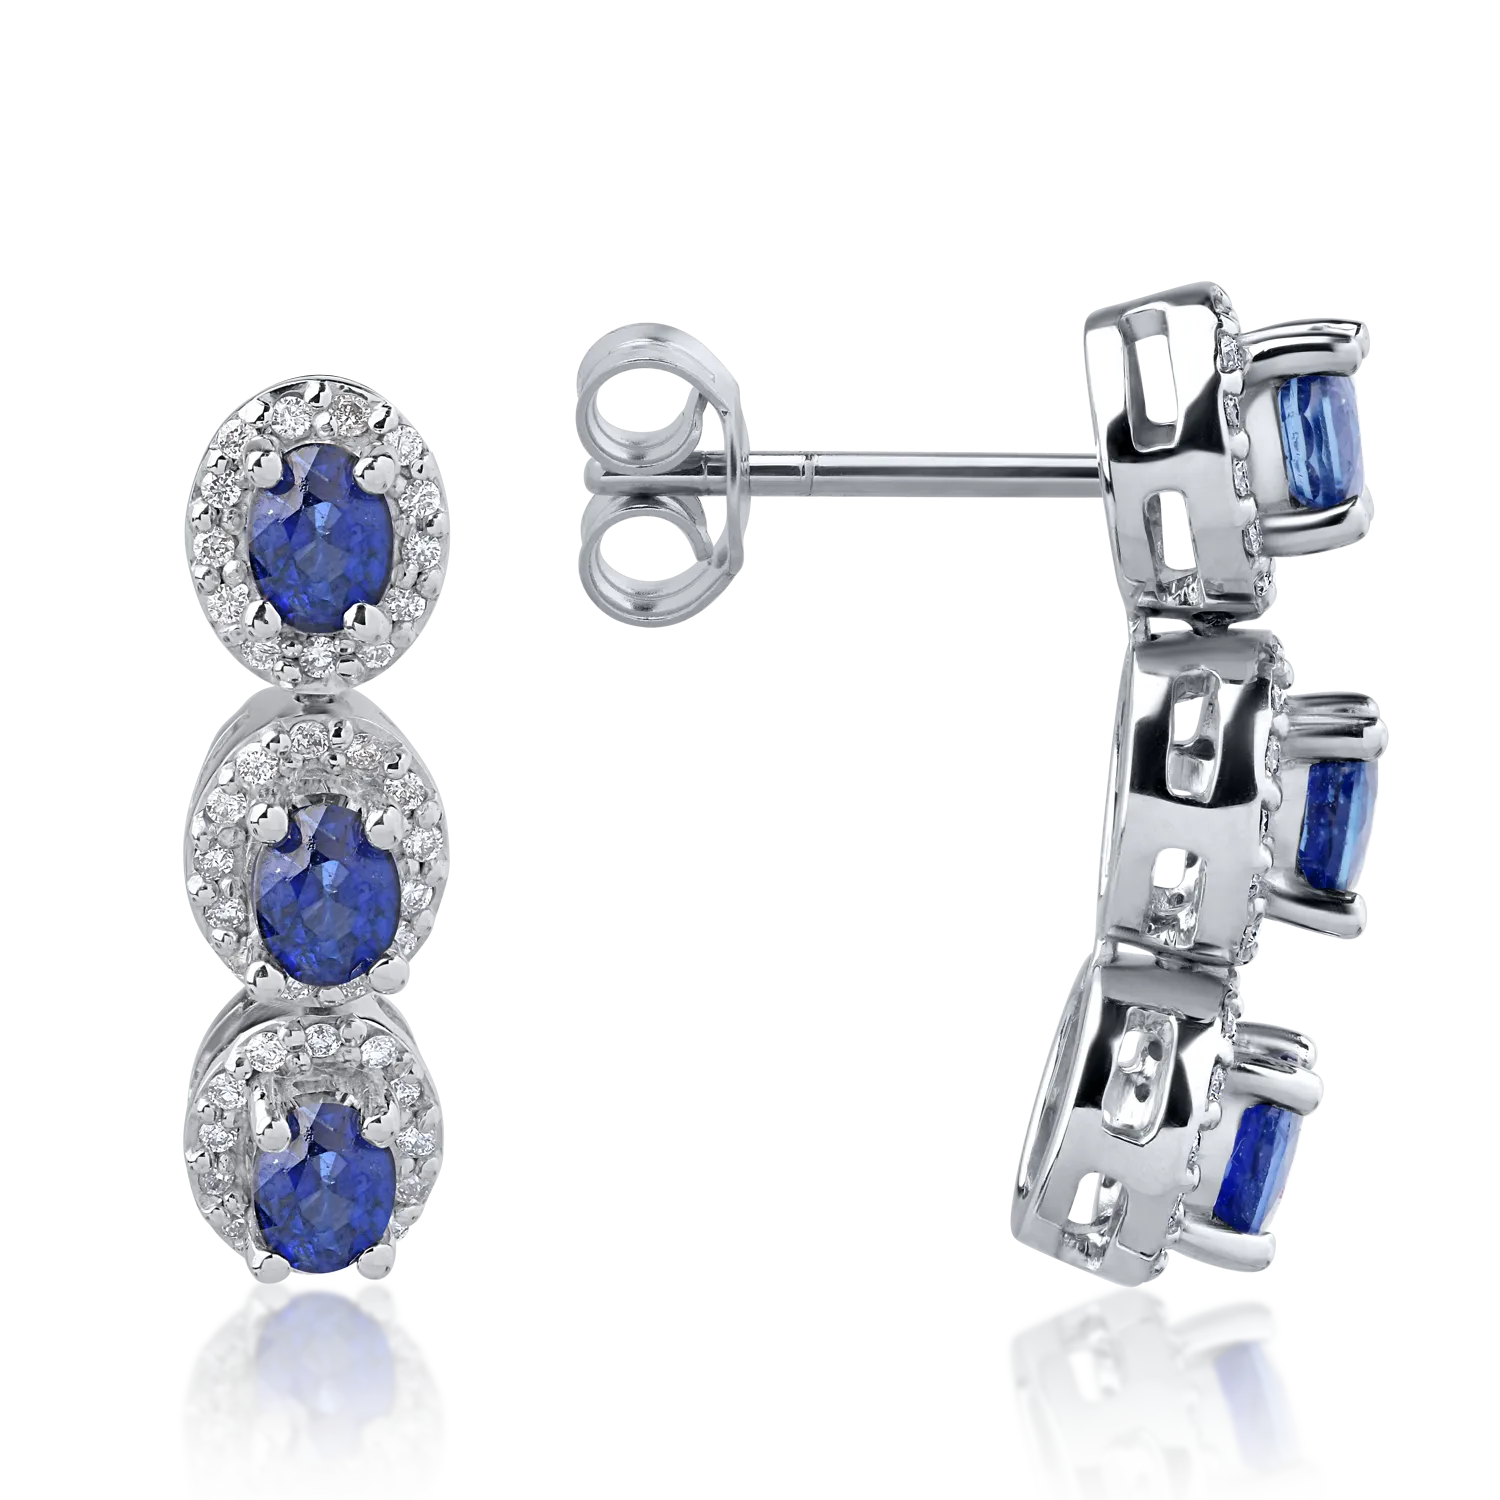 18K white gold earrings with 1.53ct sapphires and 0.22ct diamonds